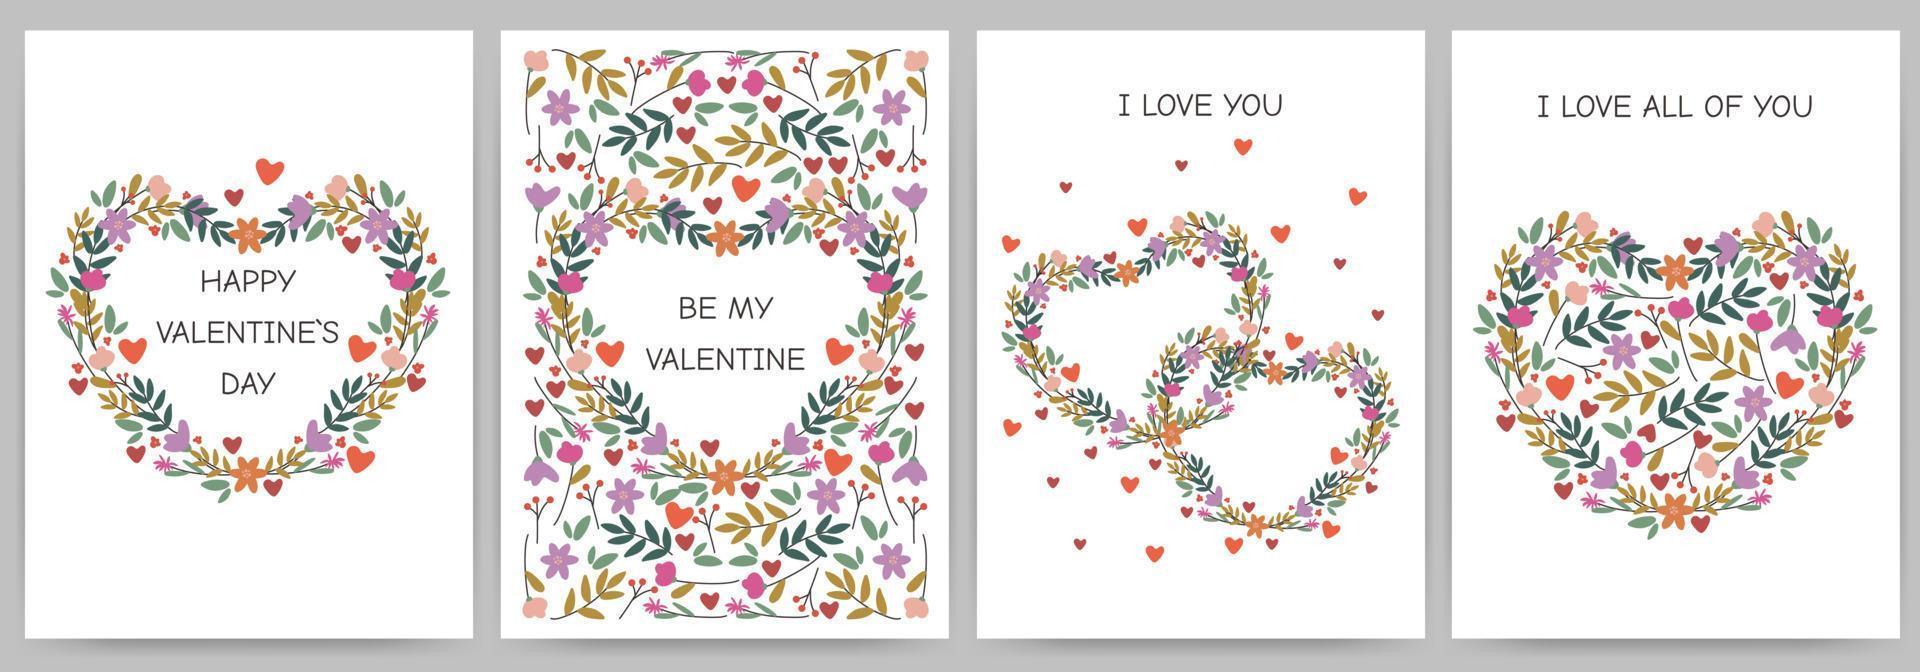 Happy Valentine's Day greeting cards. The 14th of February. Rectangular templates with flowers, hearts and text. Suitable for social media posts, mobile applications, banner design and advertising. vector